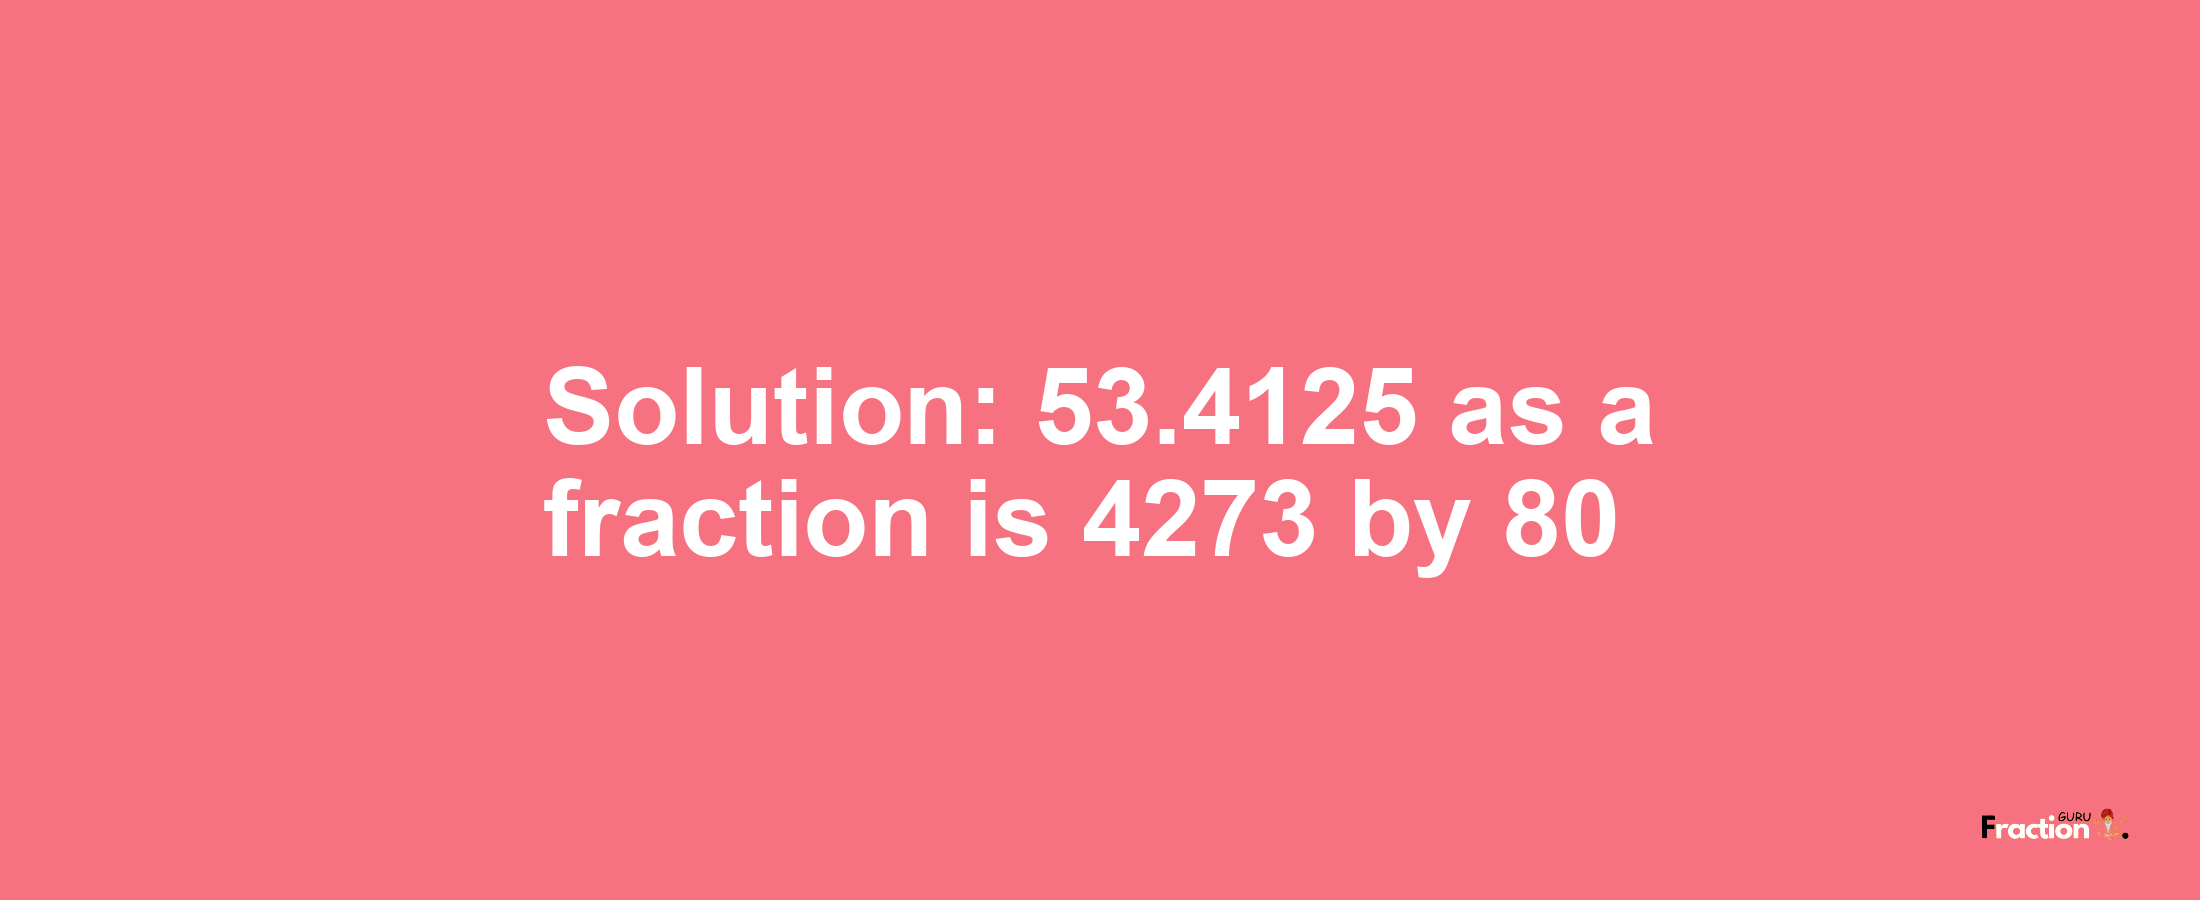 Solution:53.4125 as a fraction is 4273/80